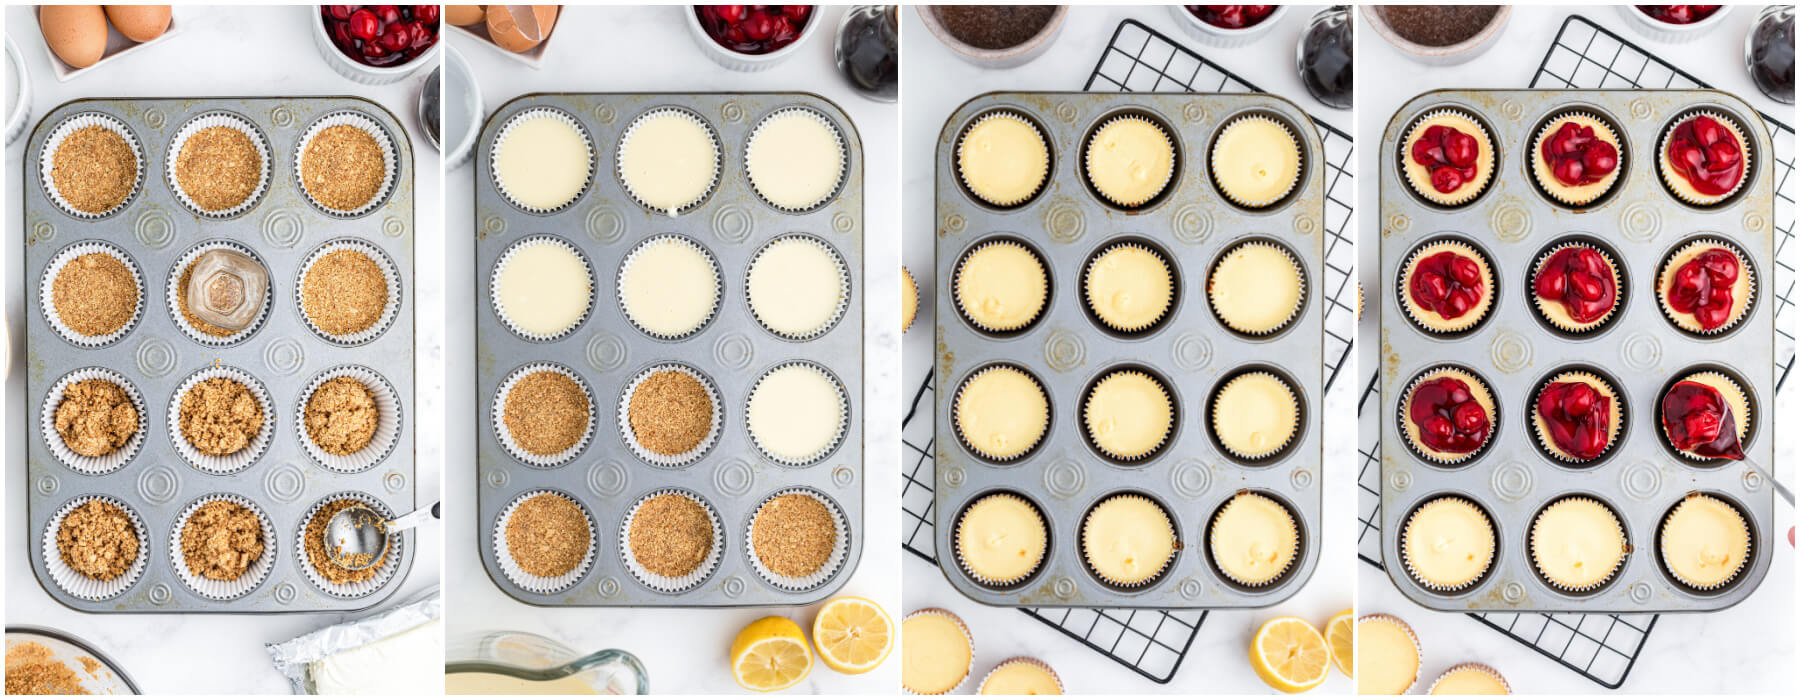 Process images showing how to fill muffin tins to make mini cheesecakes.